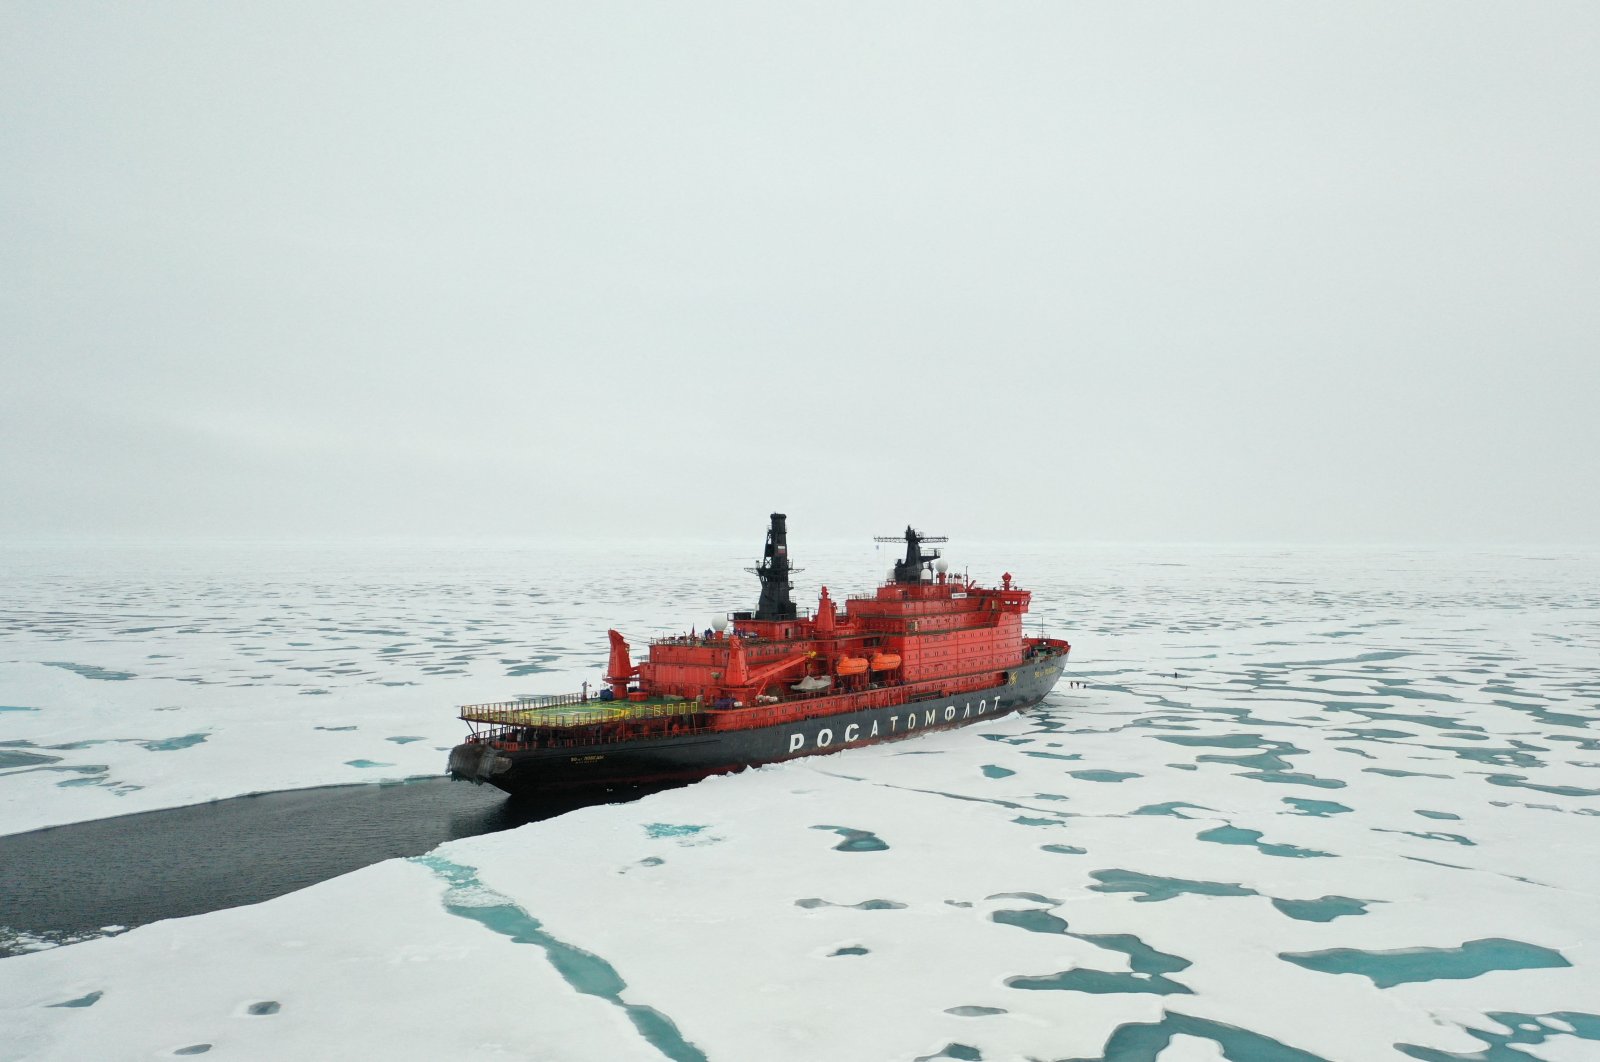 The Russian nuclear-powered icebreaker "50 Years of Victory" is seen at the North Pole on Aug. 18, 2021. (AFP Photo)